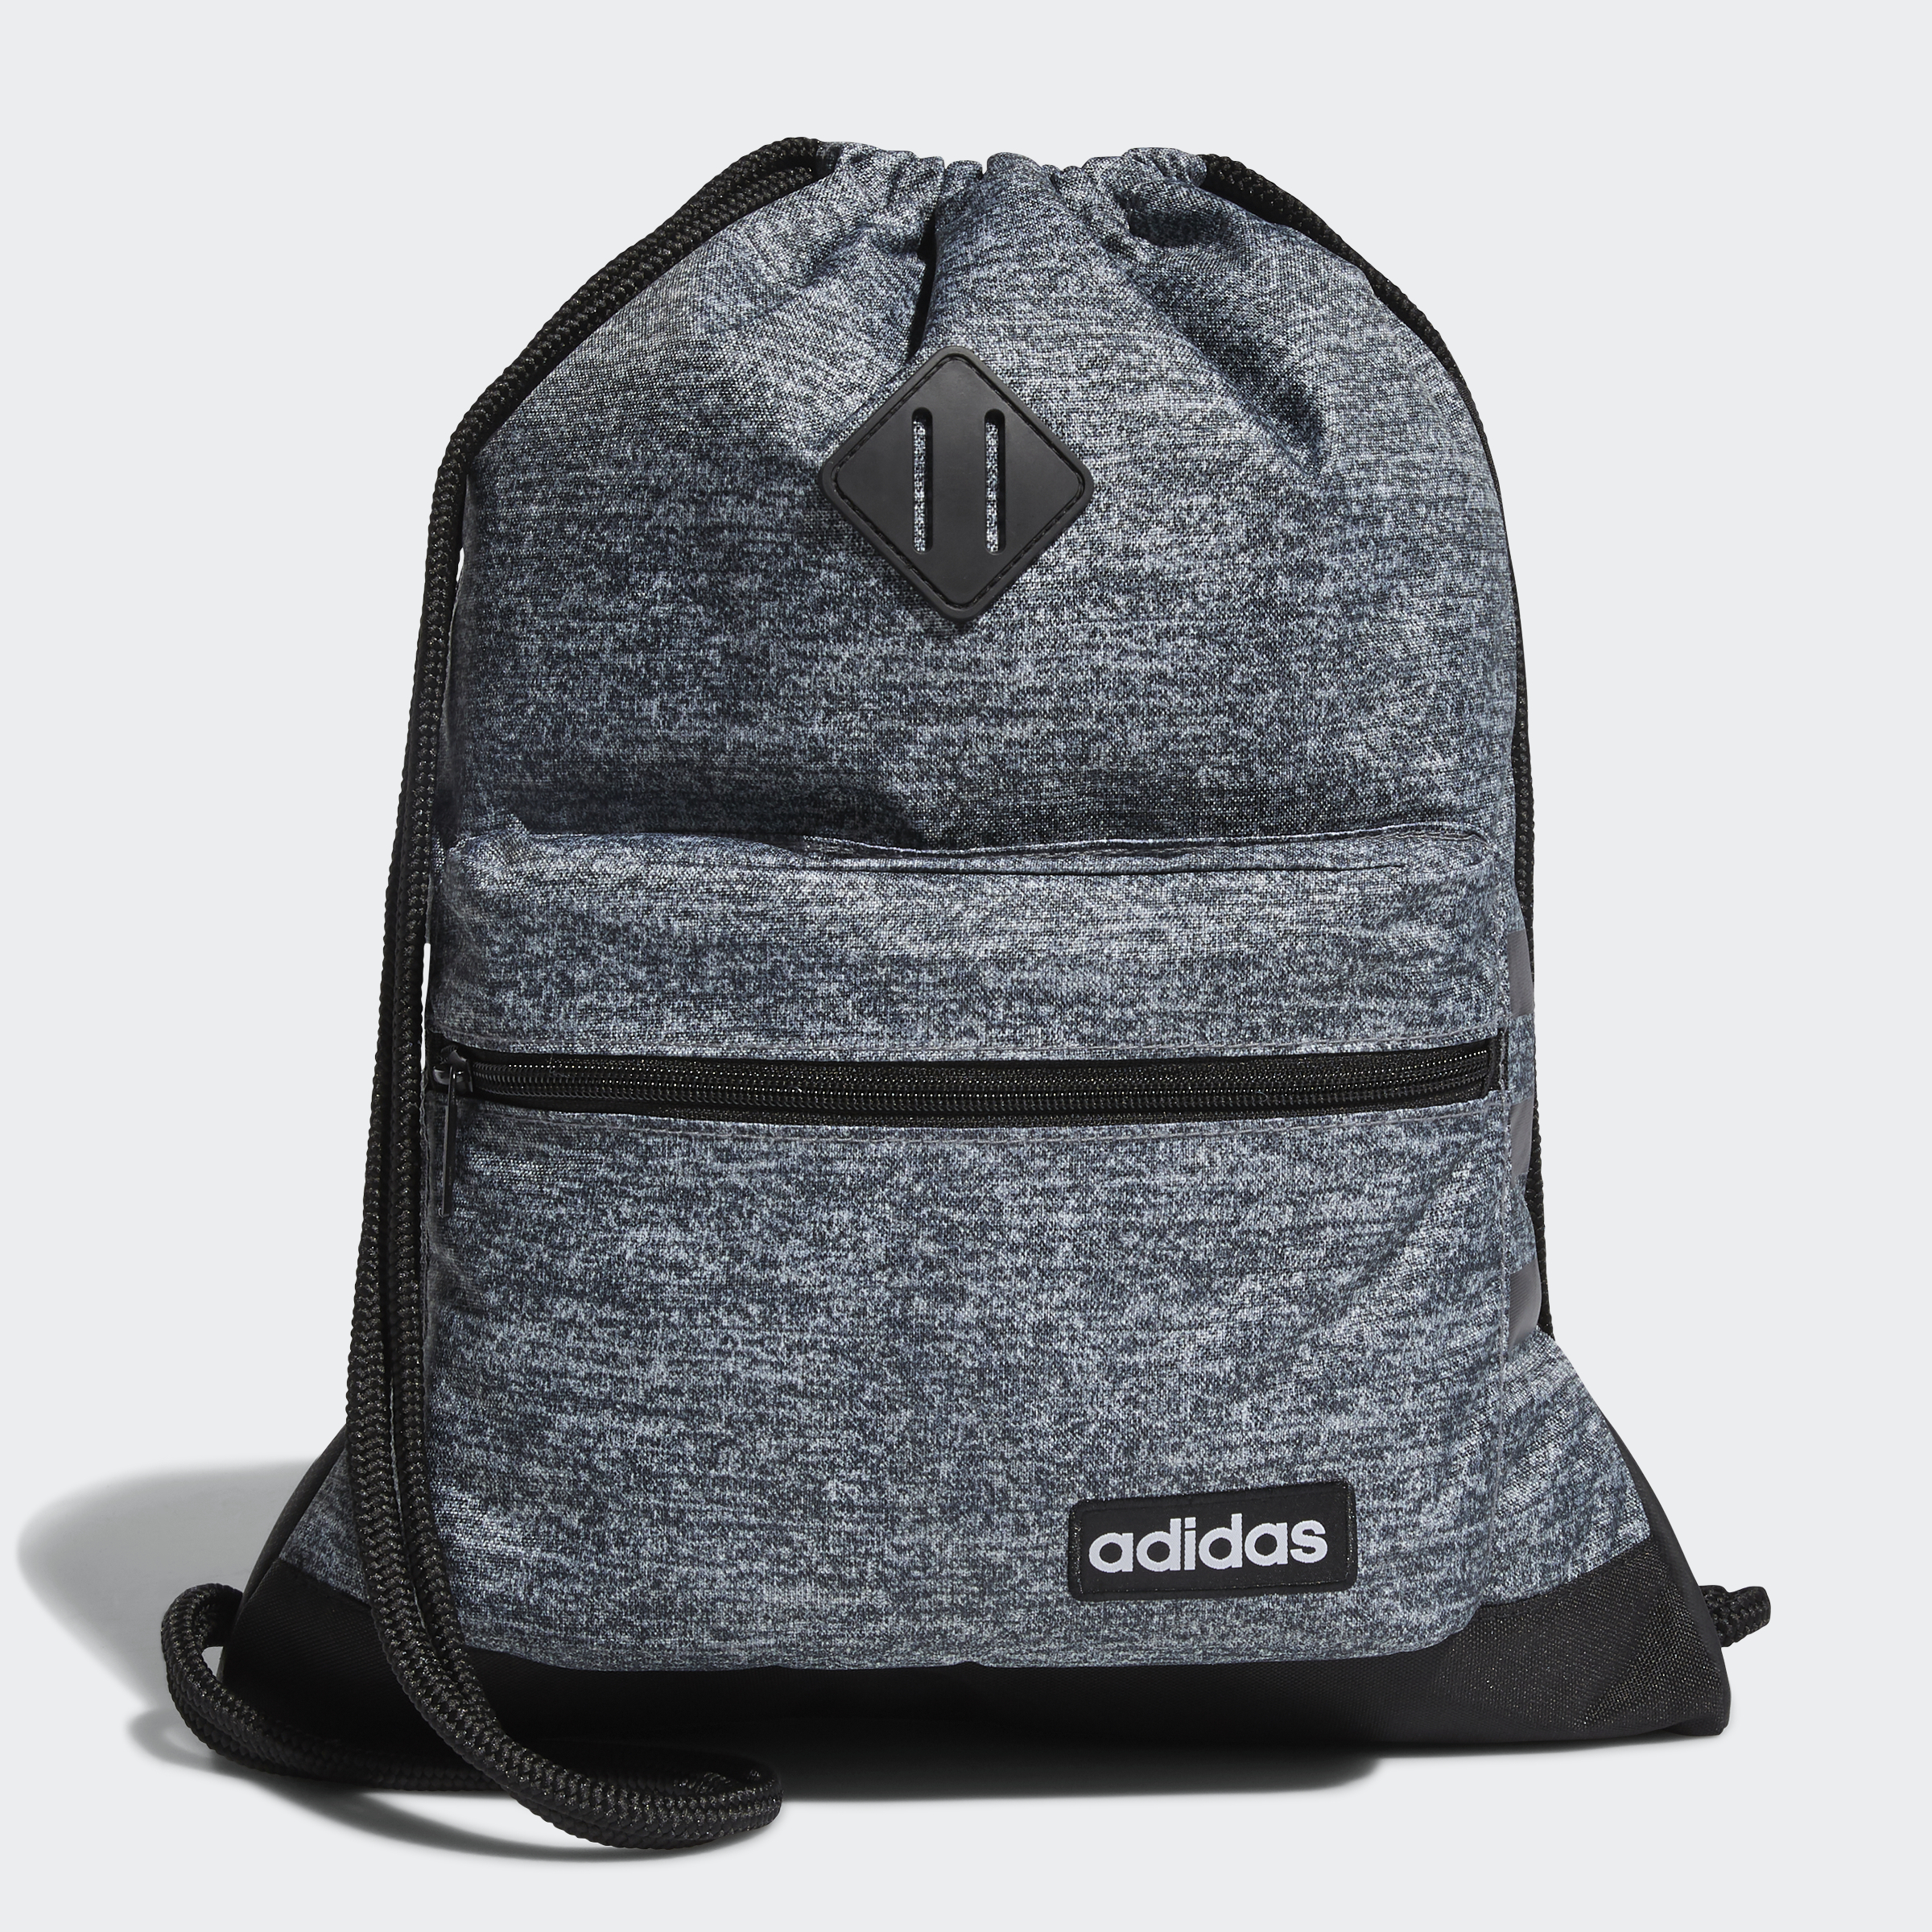 adidas Classic 3-Stripes Sackpack Bags 